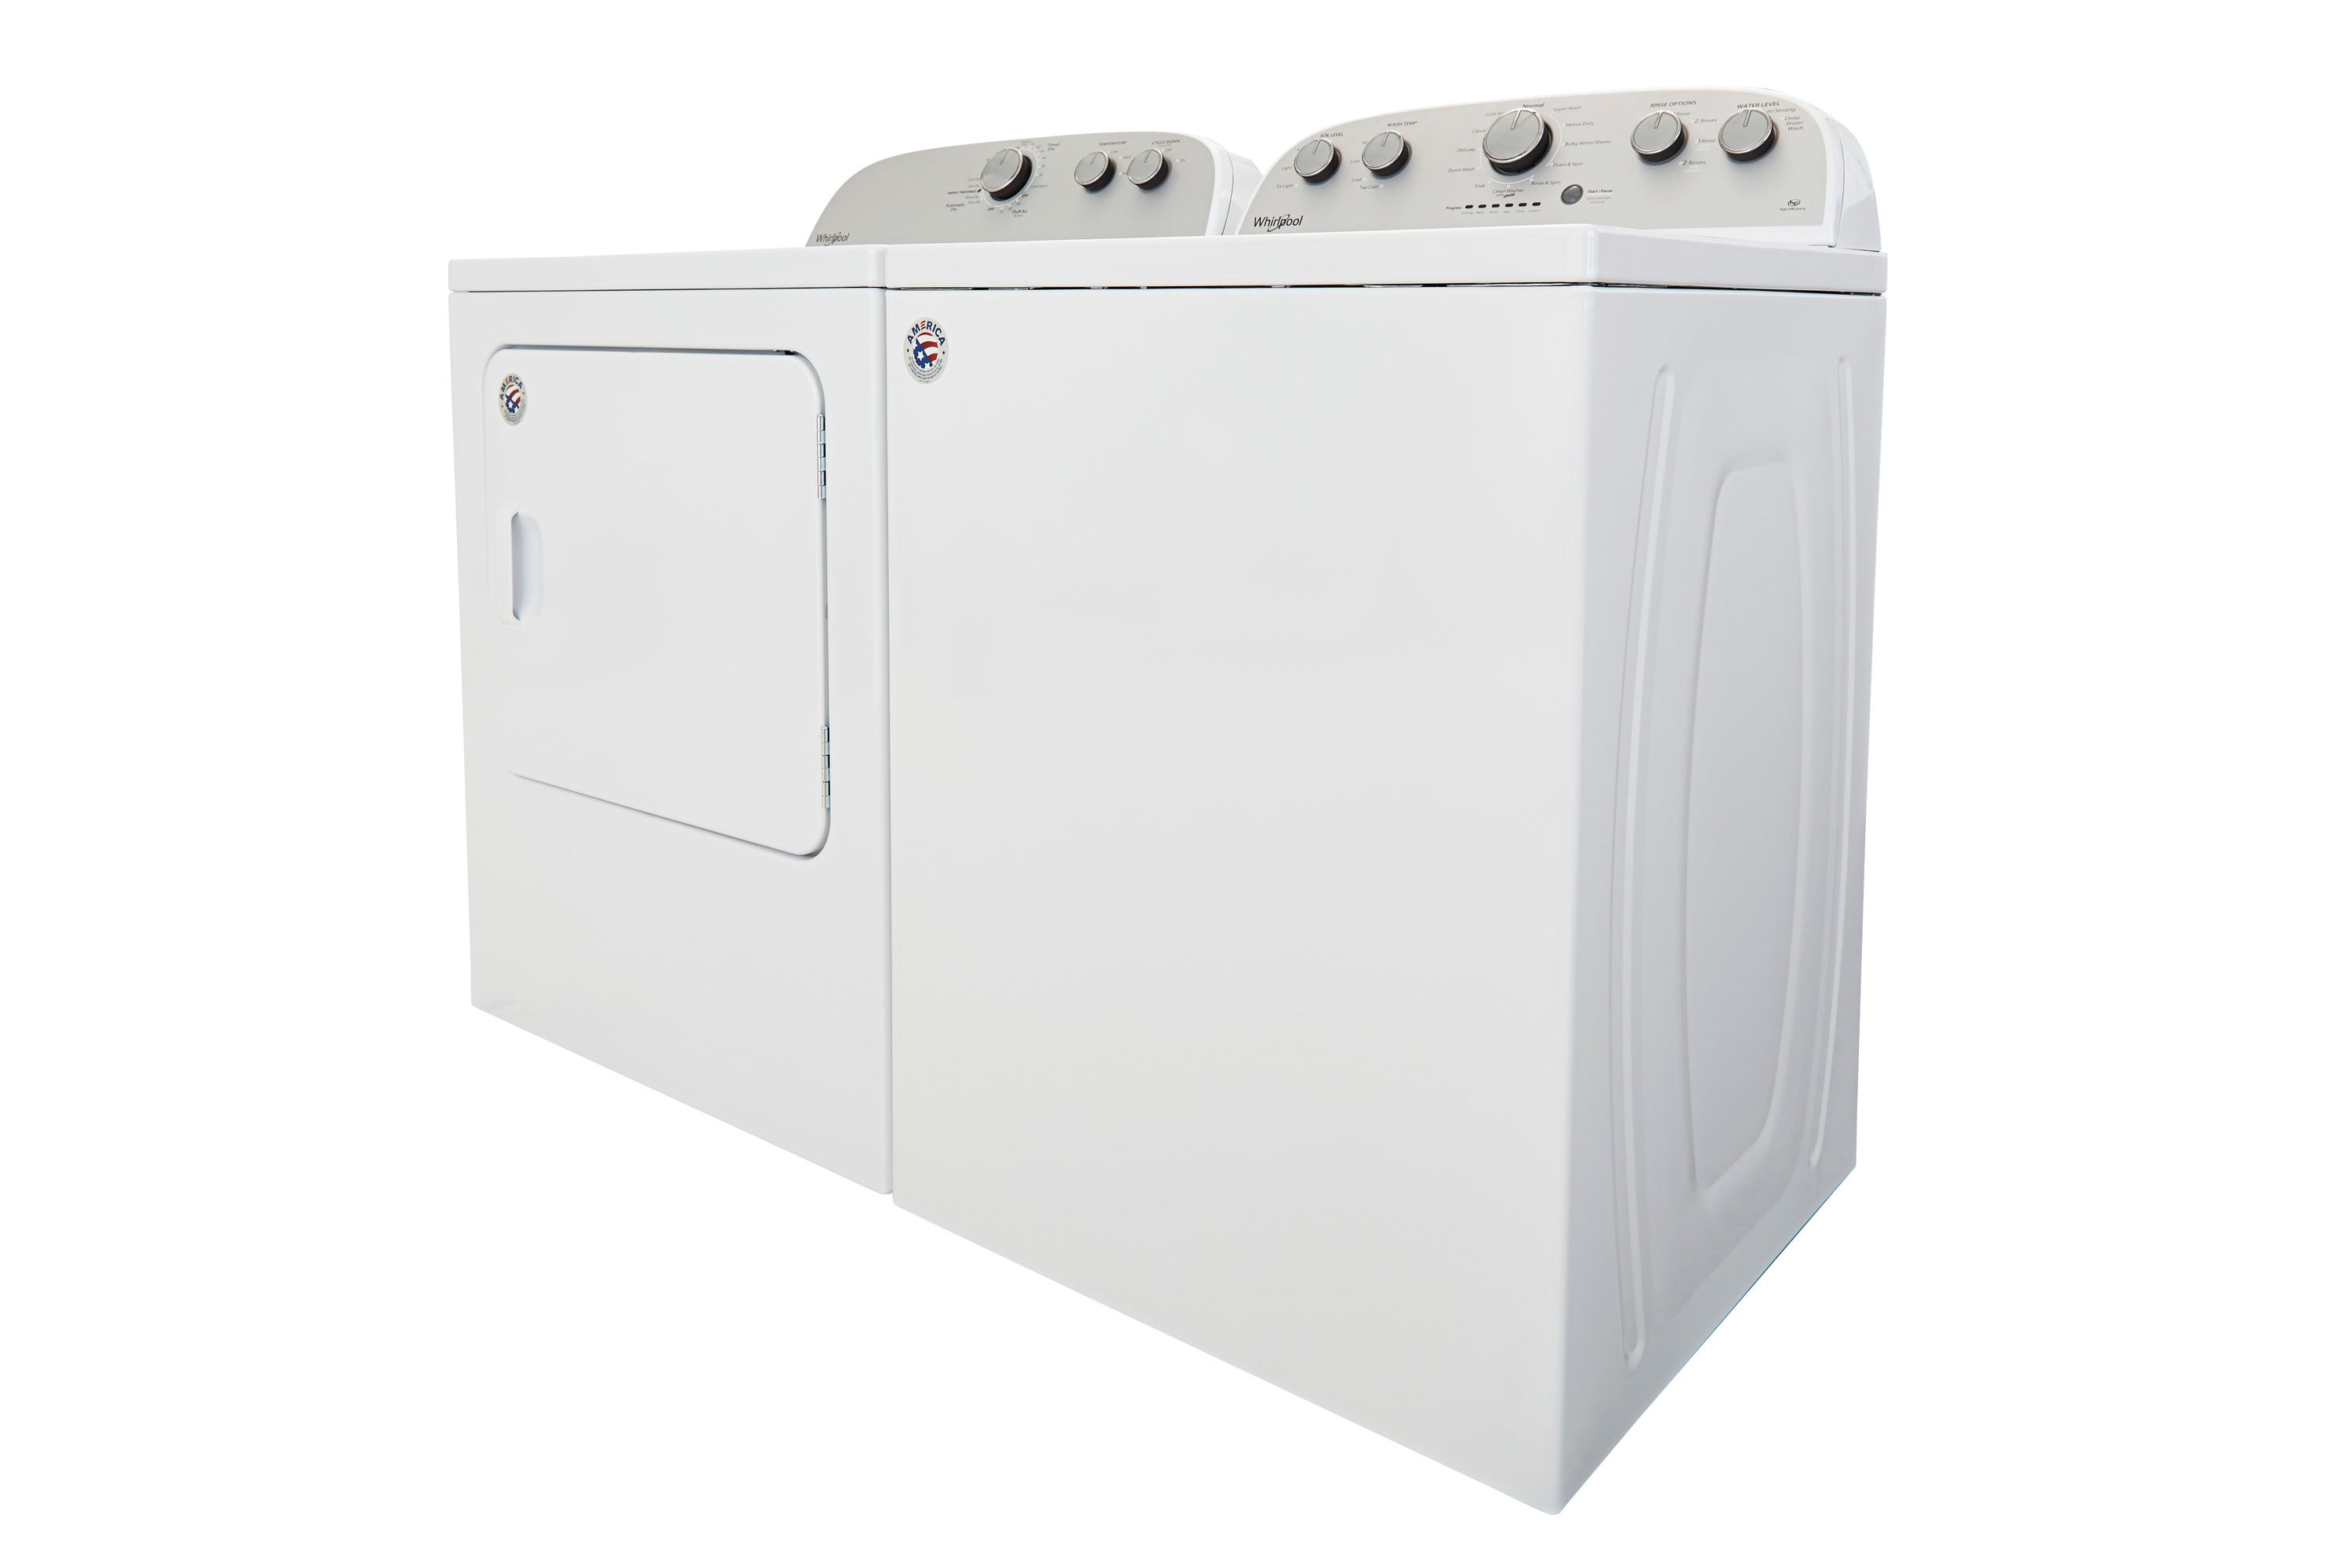 Whirlpool WFW75HEFW Front-Loading Washing Machine Review - Reviewed